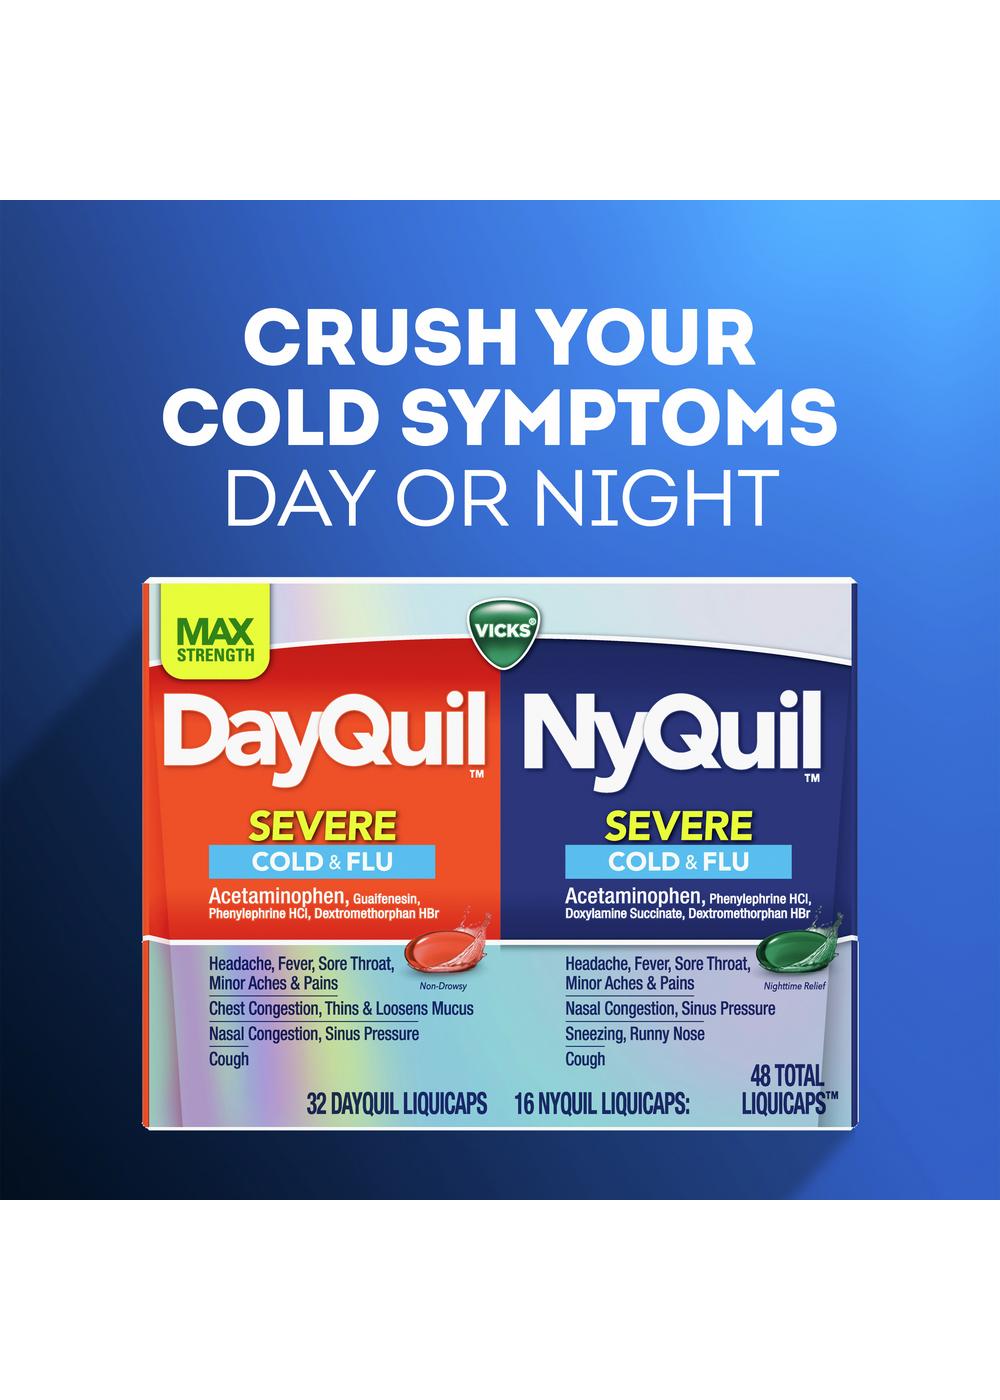 Vicks NyQuil SEVERE Cold & Flu Liquicaps; image 8 of 11